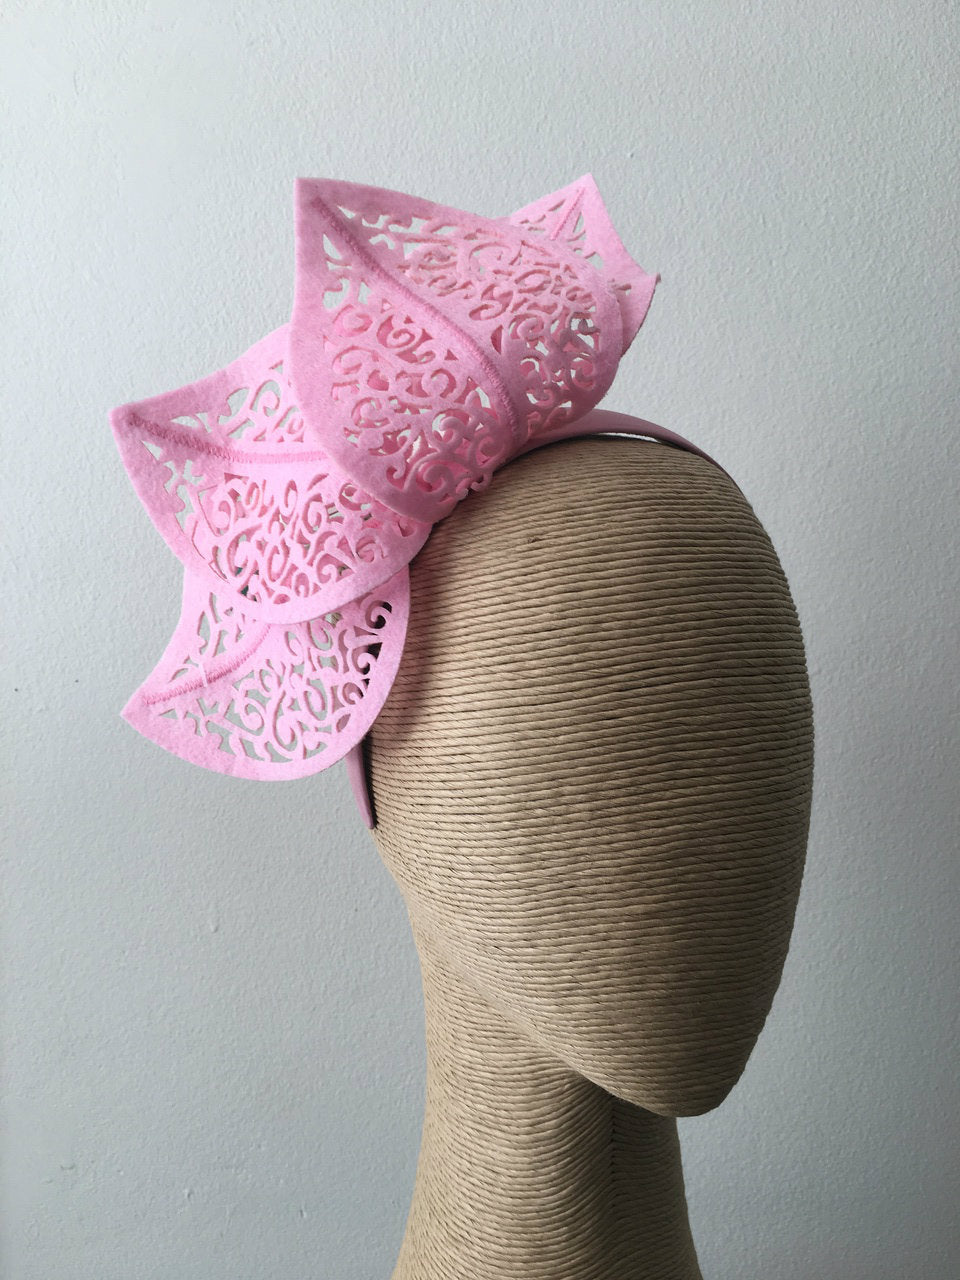 Max Alexander Cutout Leaf Crown in Baby Pink on a Headband